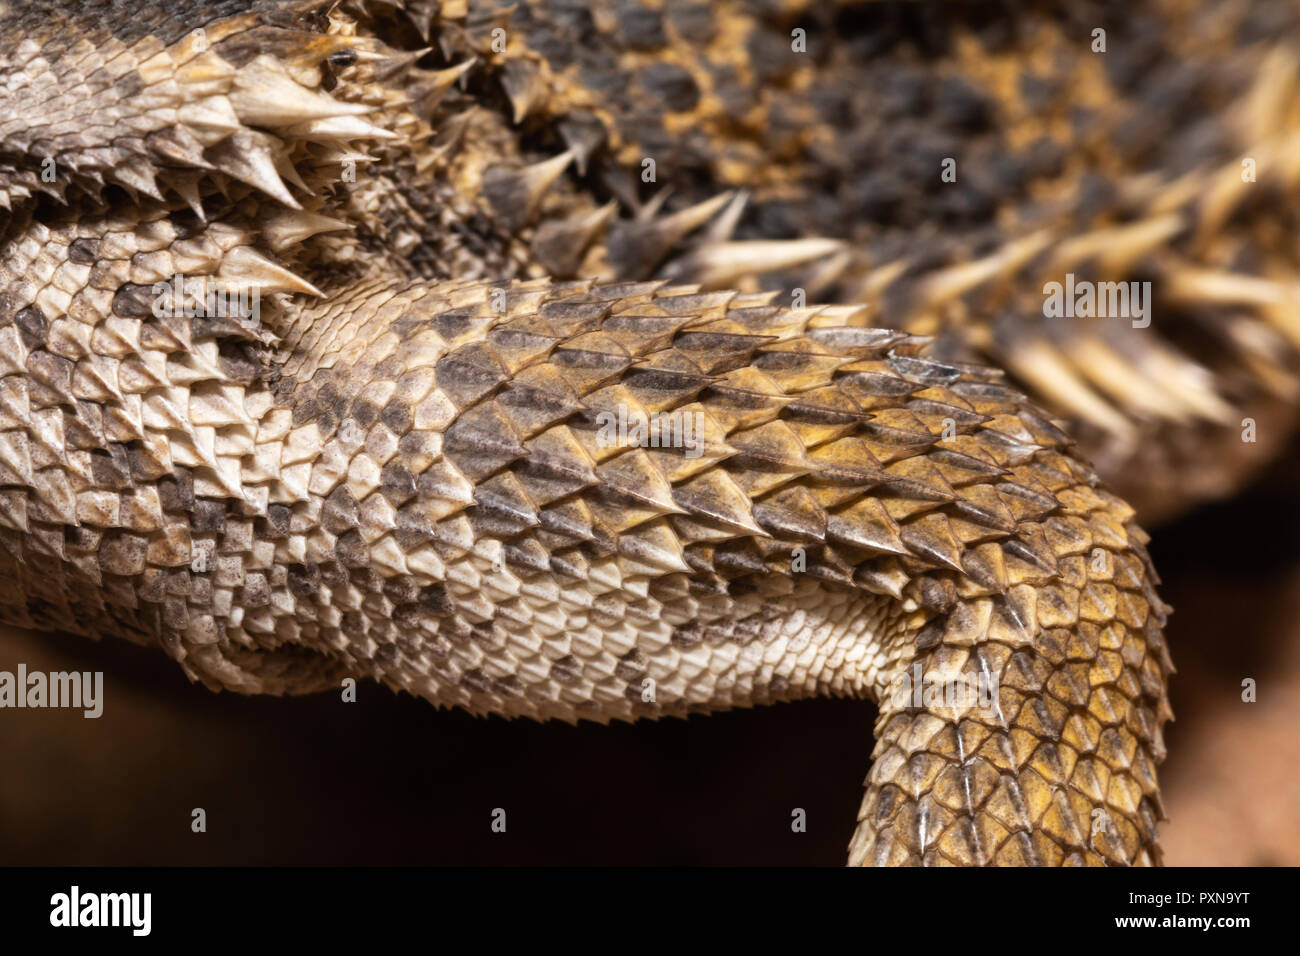 Snake skin abstract texture showing the reptile scales as a simple  background Stock Photo - Alamy